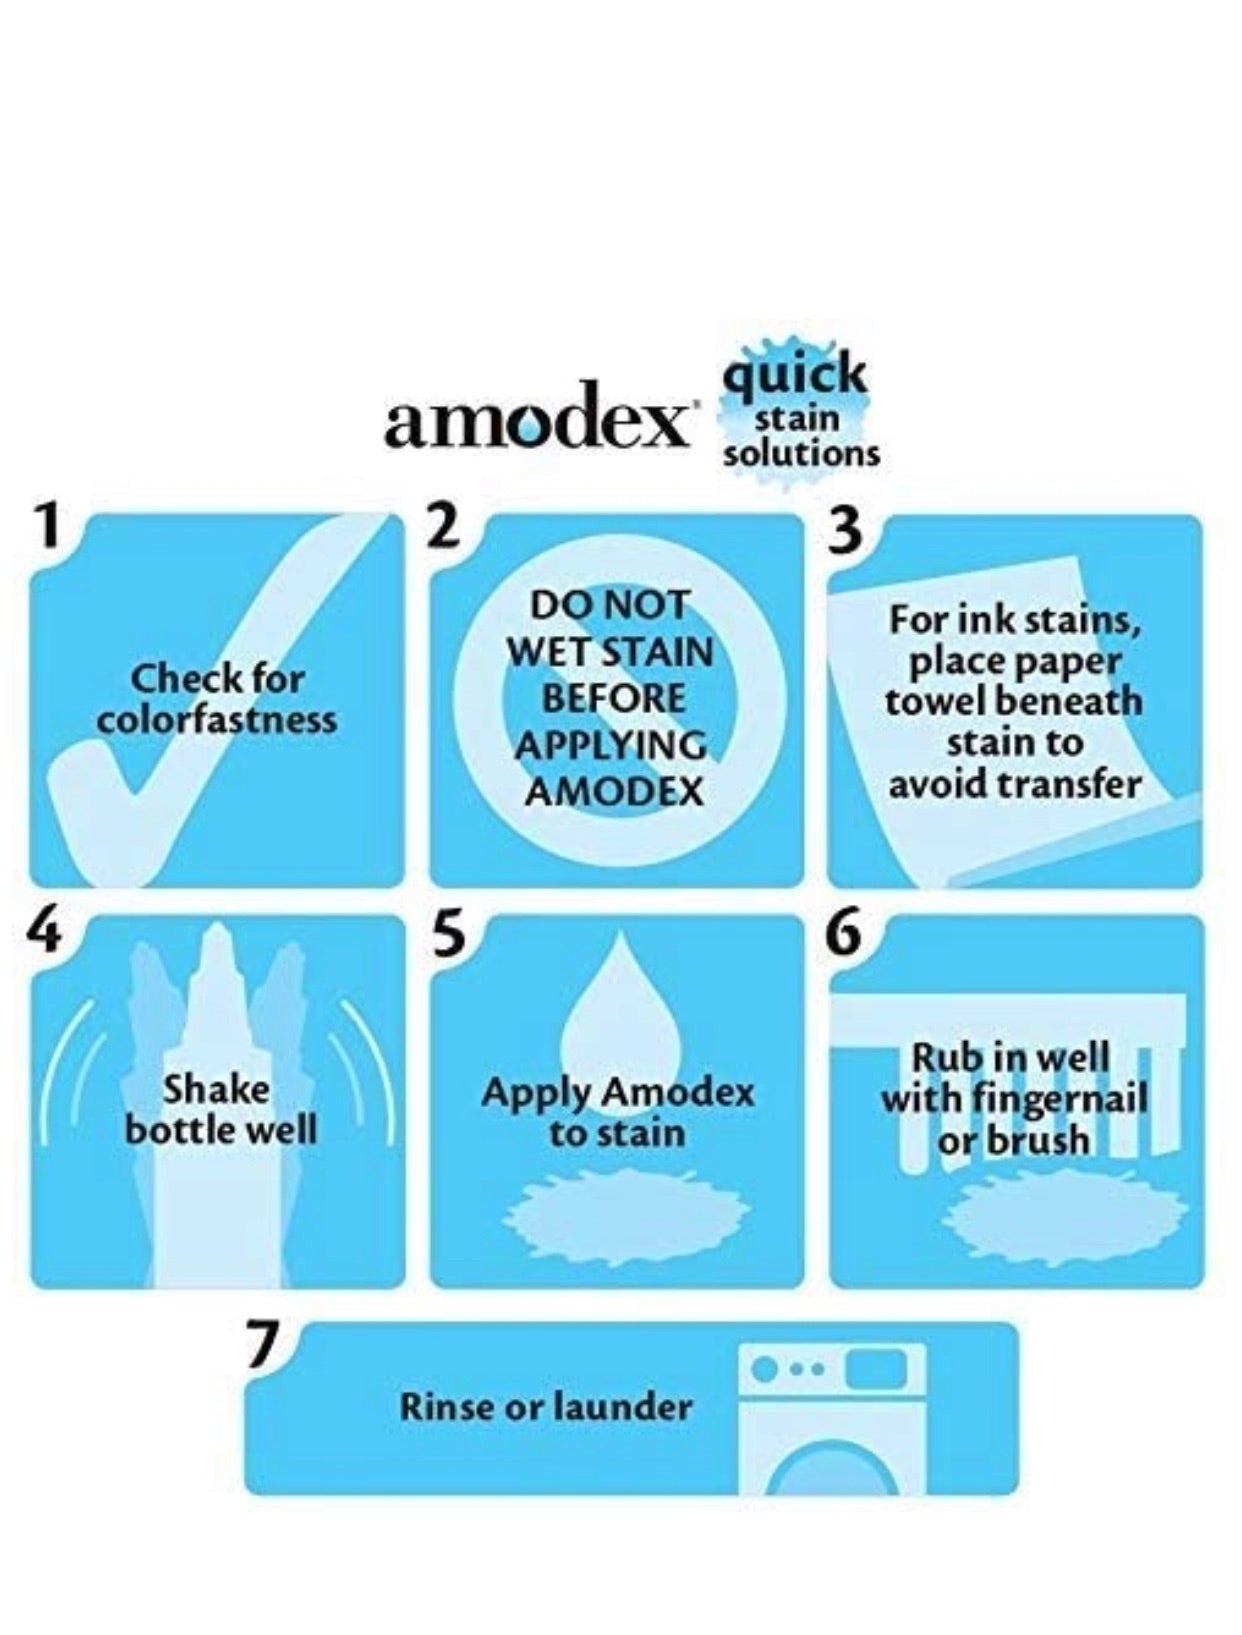 Amodex Ink and Stain Remover – Mascara Style. Cleans Marker, Ink, Crayon, Pen, Makeup from Furniture, Skin, Clothing, Fabric, Leather - 15ml